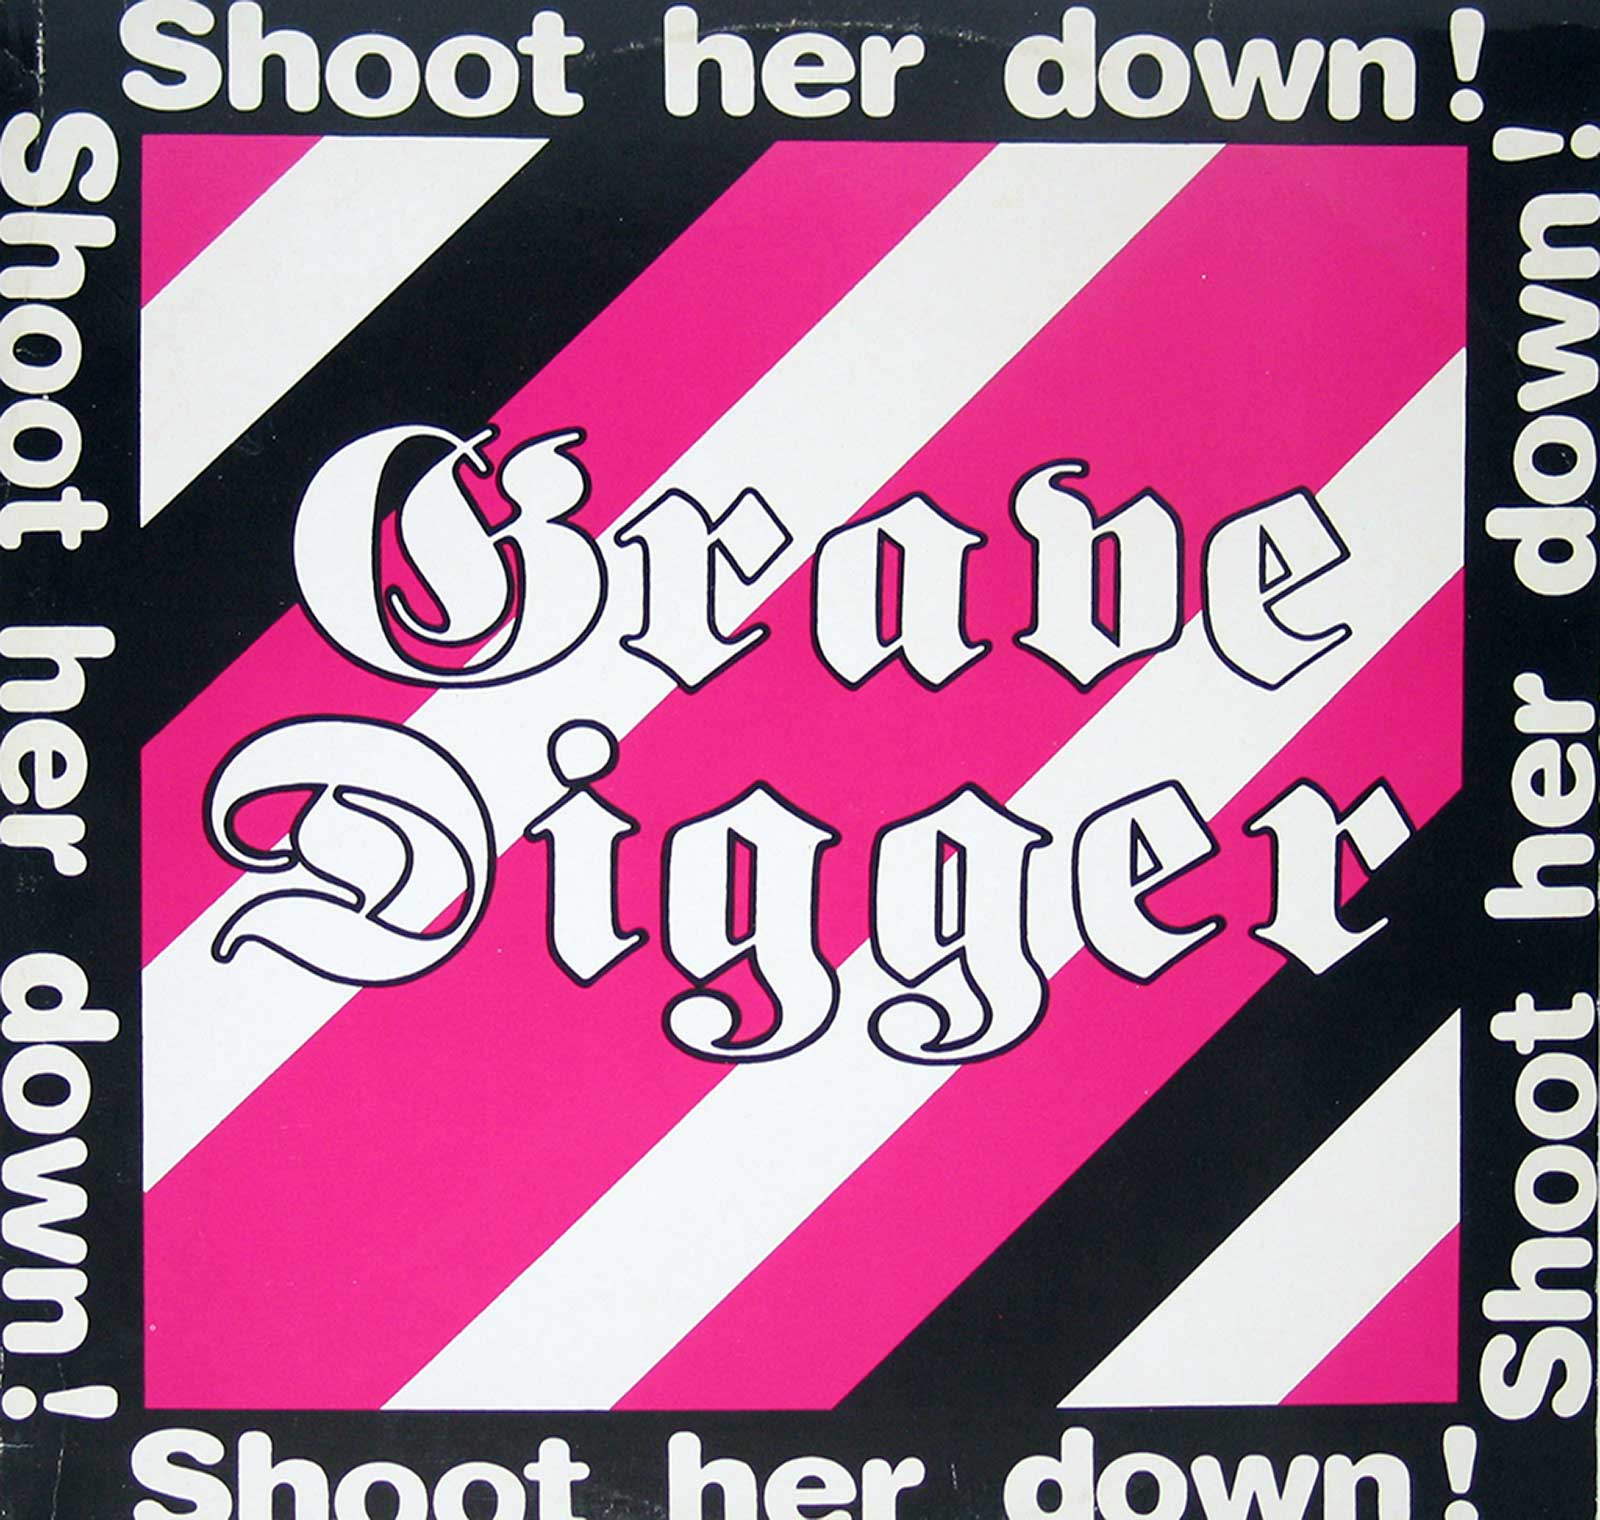 large album front cover photo of: Shoot Her Down by Grave Digger 